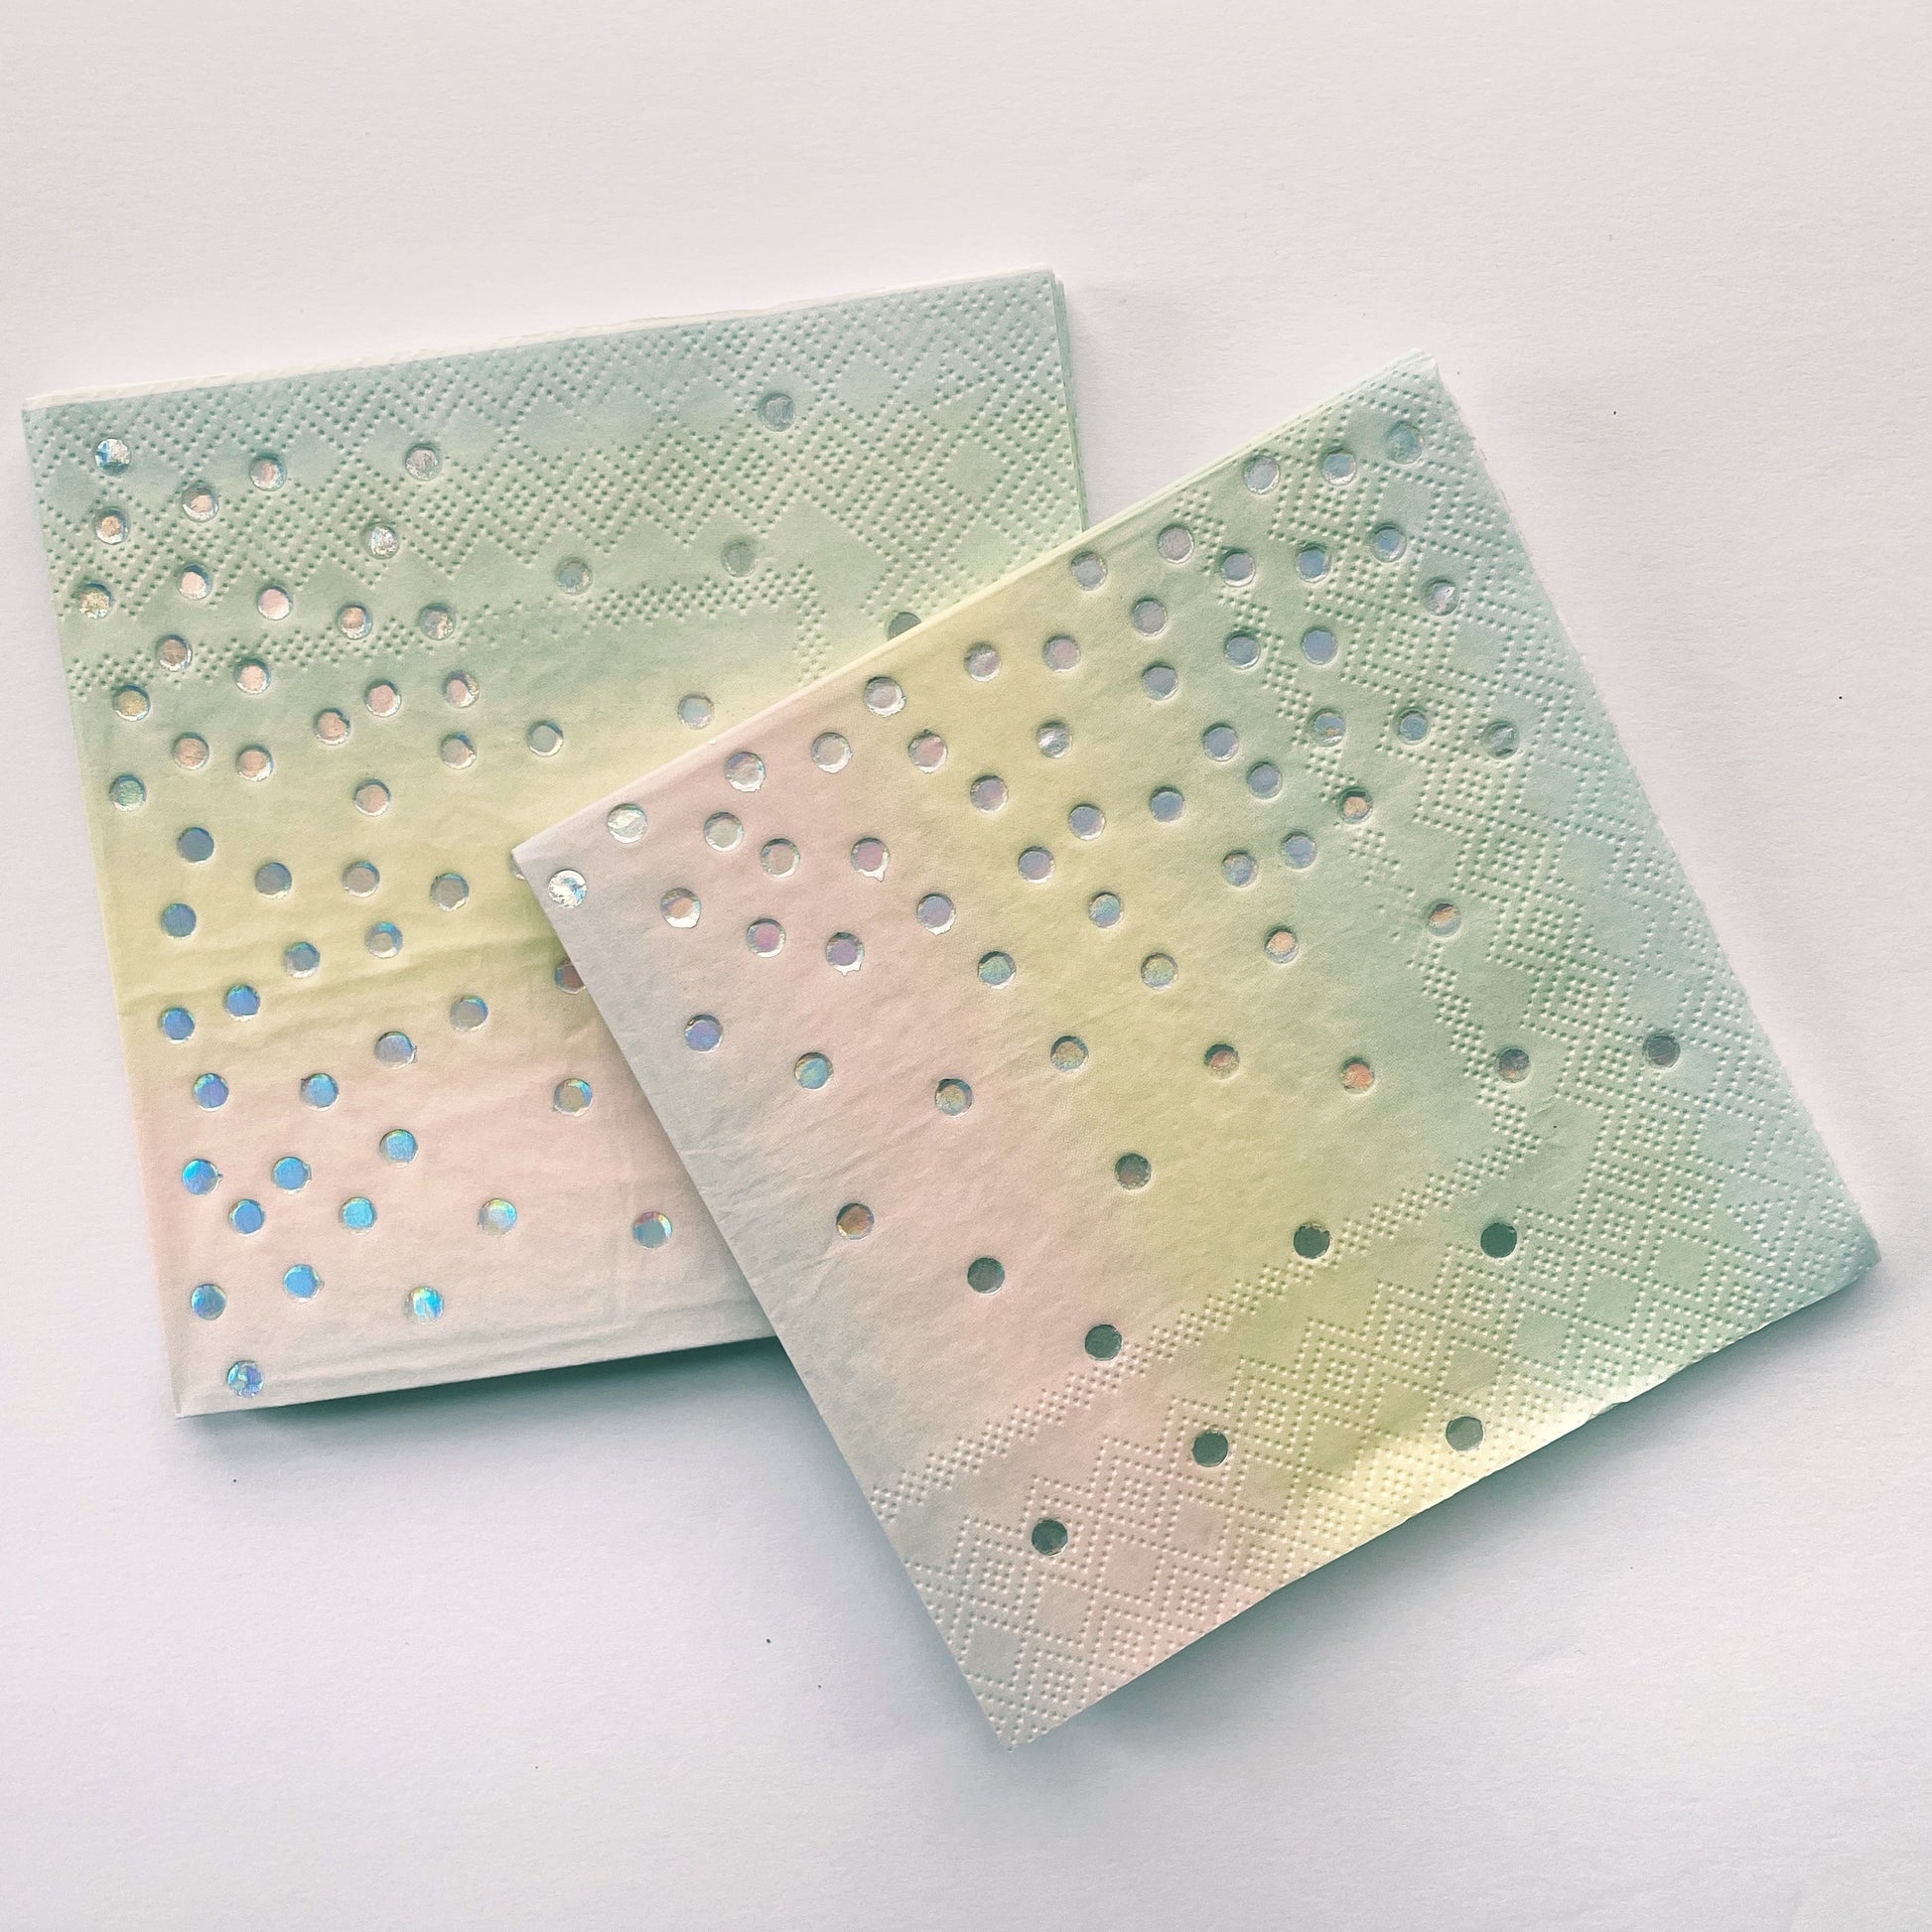 The Ombre Party Kit's pink, yellow, green and silver paper party napkins.